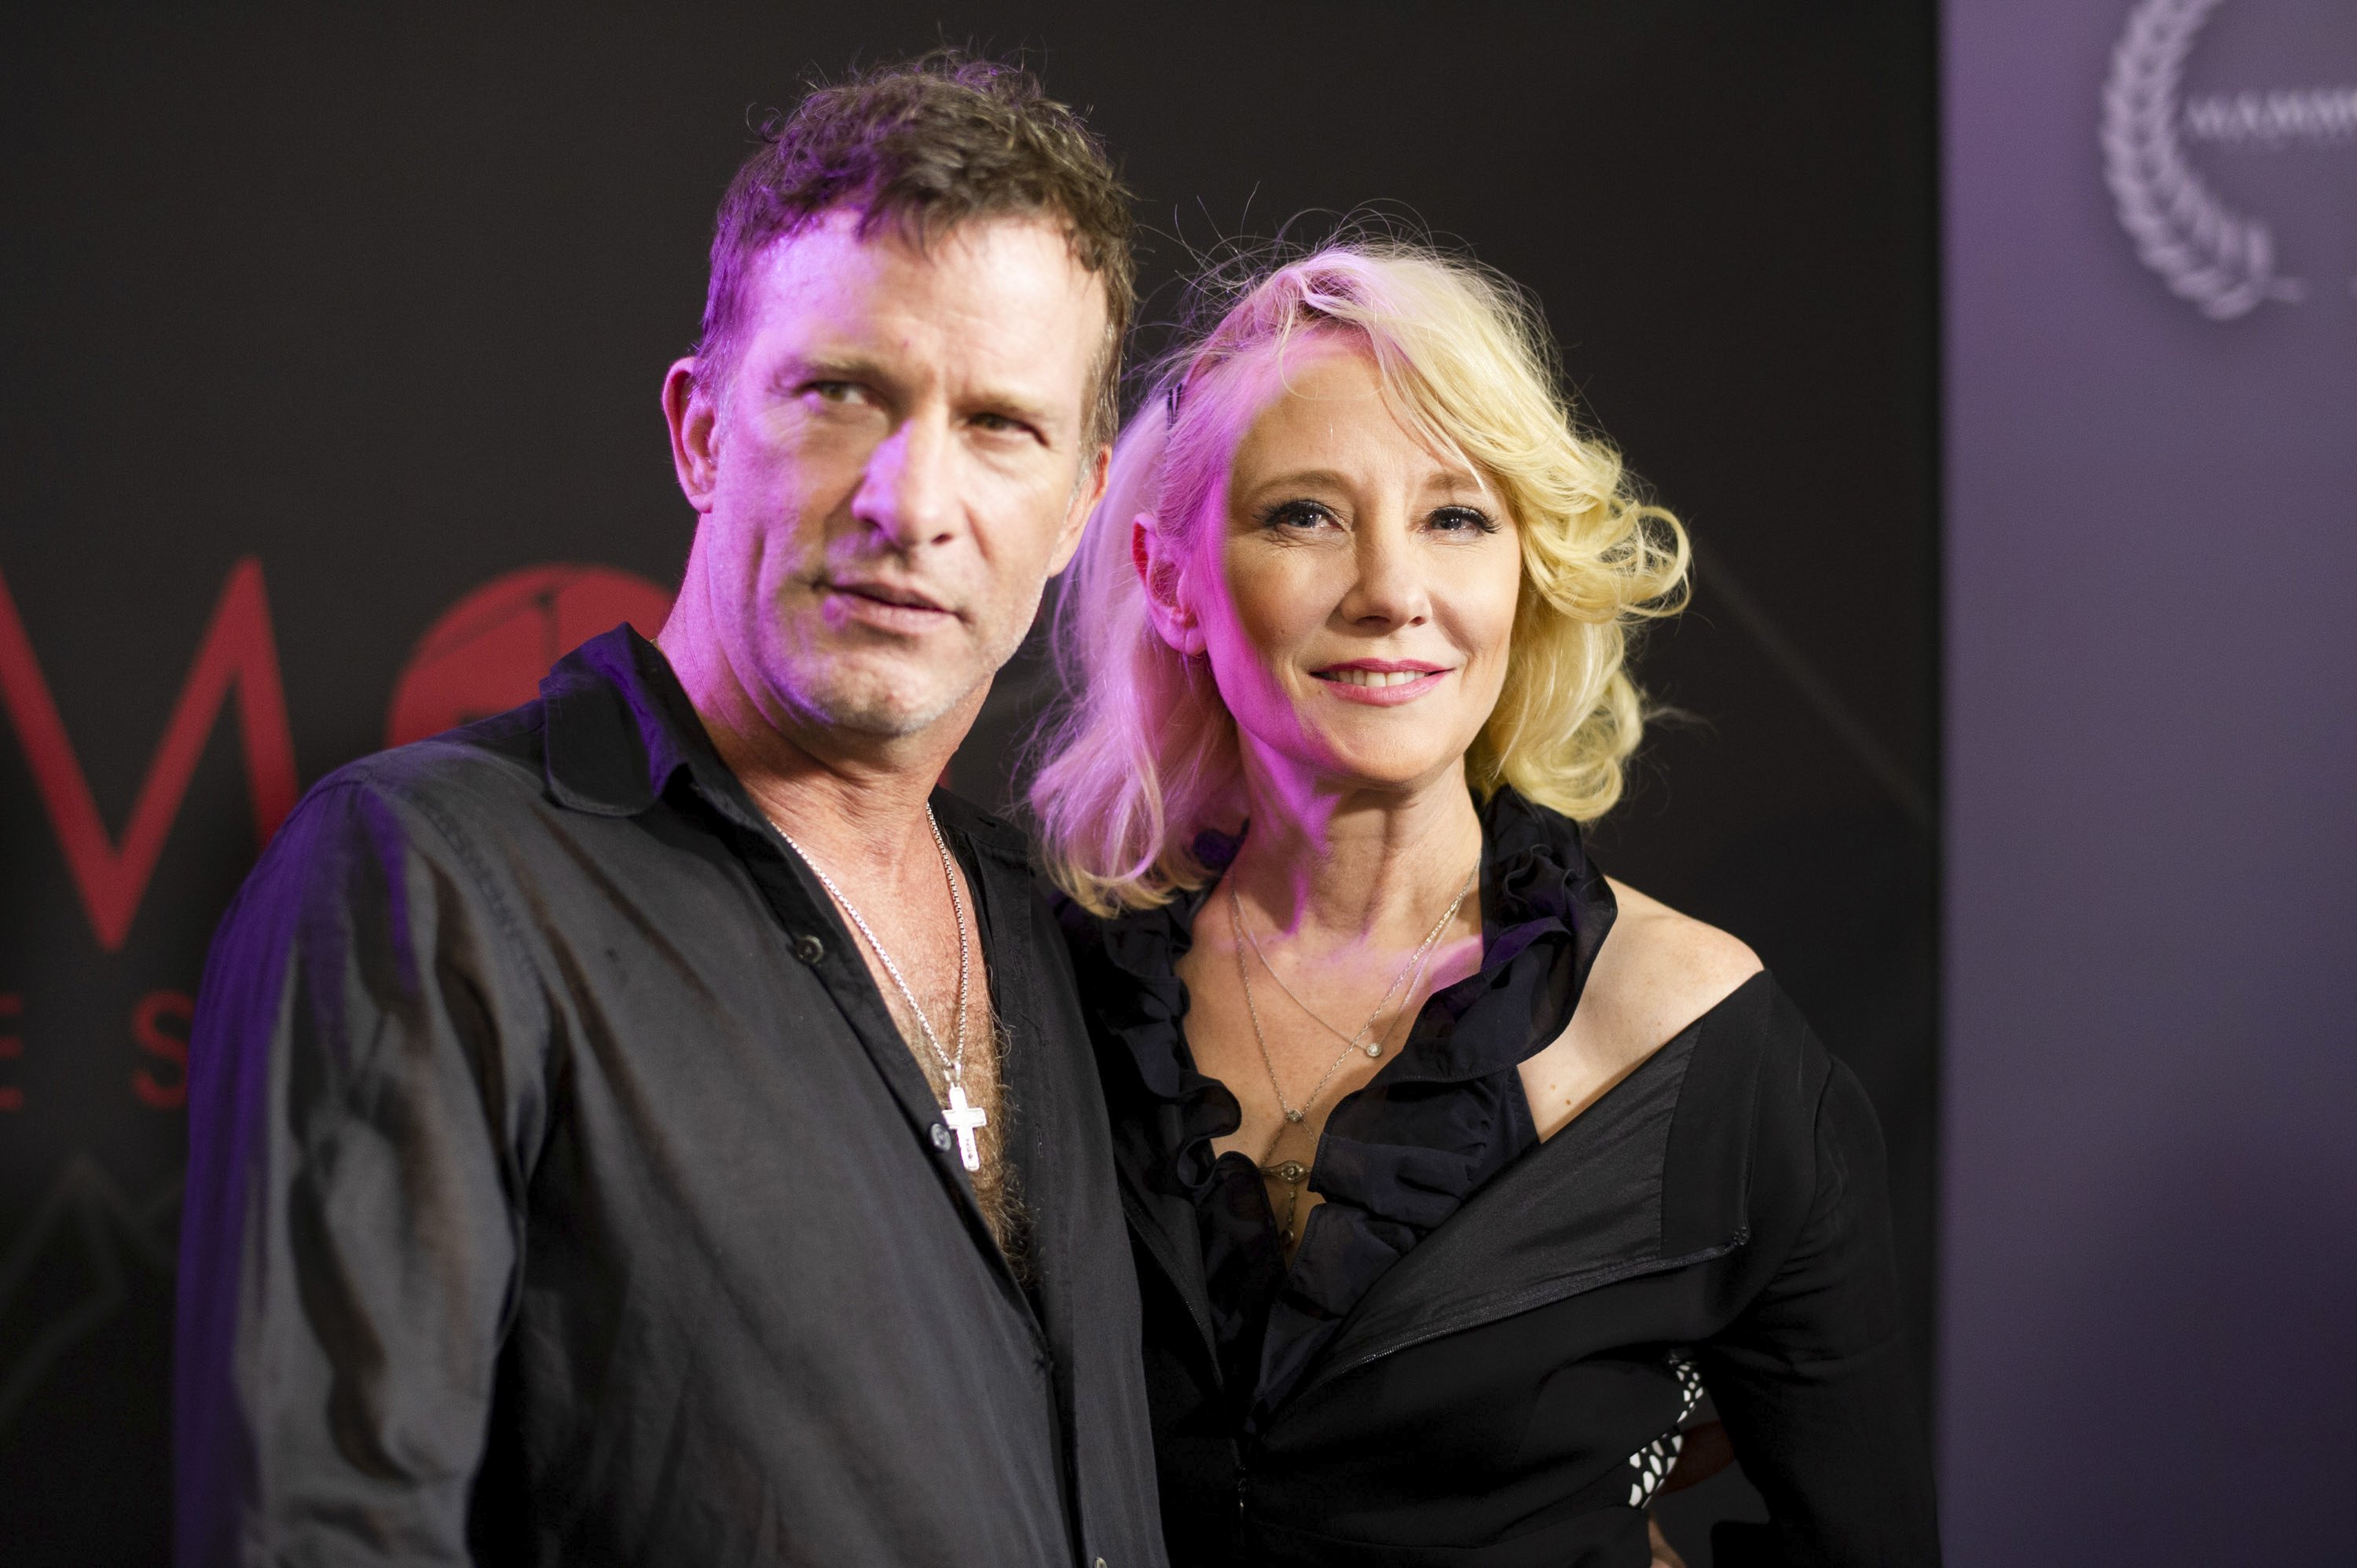 Thomas Jane and Anne Heche at the 3rd Annual Mammoth Film Festival on February 28, 2020 in Mammoth Lakes, California.  |  Source: Getty Images